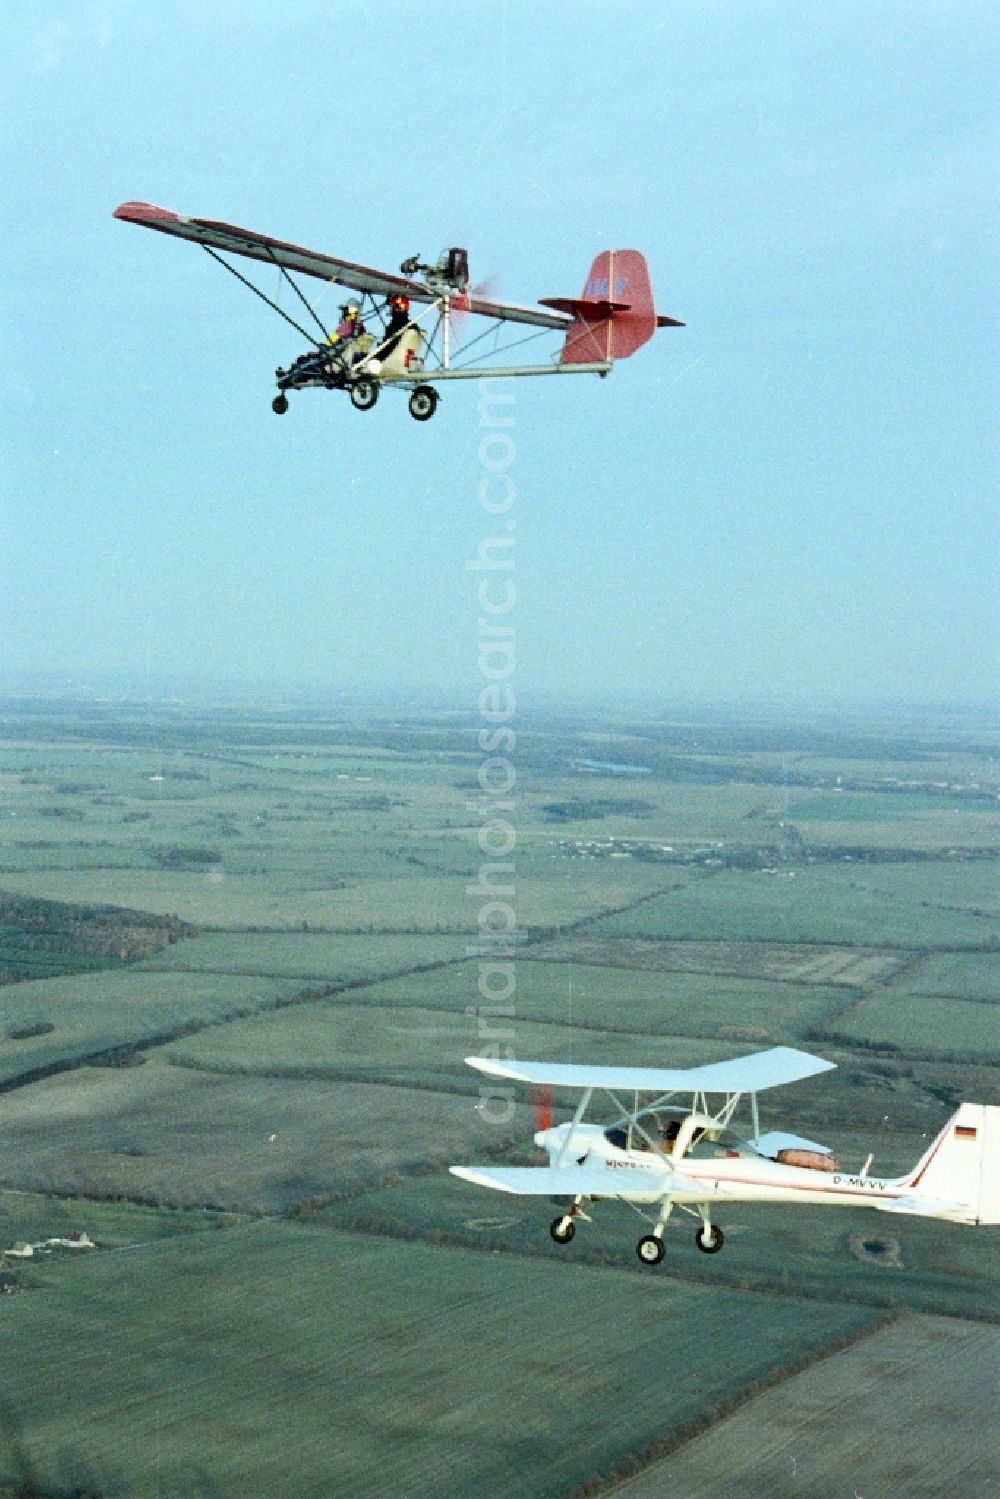 Aerial photograph Eggersdorf - Ultralight aircraft in flight above the sky MISTRAL with the identifier D-MVVV in formation with a skywalker airplane in Eggersdorf in the state Brandenburg, Germany